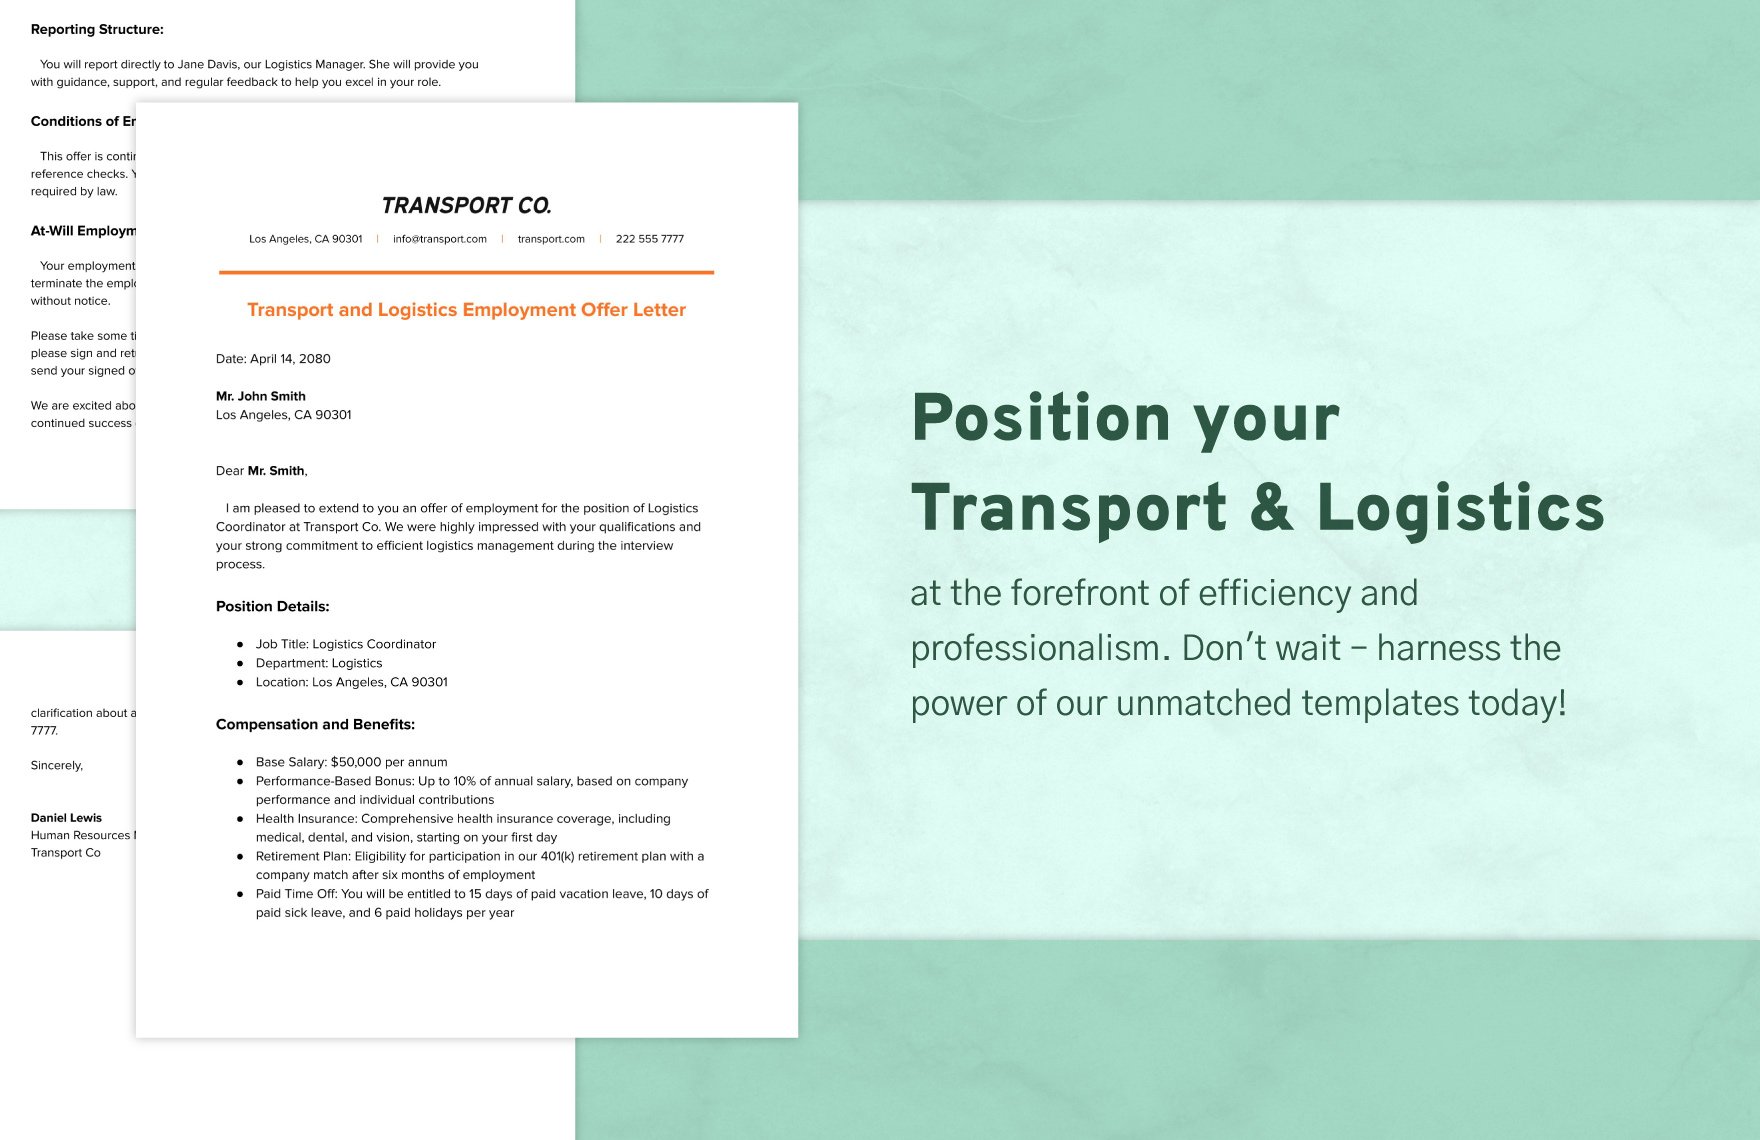 Transport and Logistics Employment Offer Letter Template